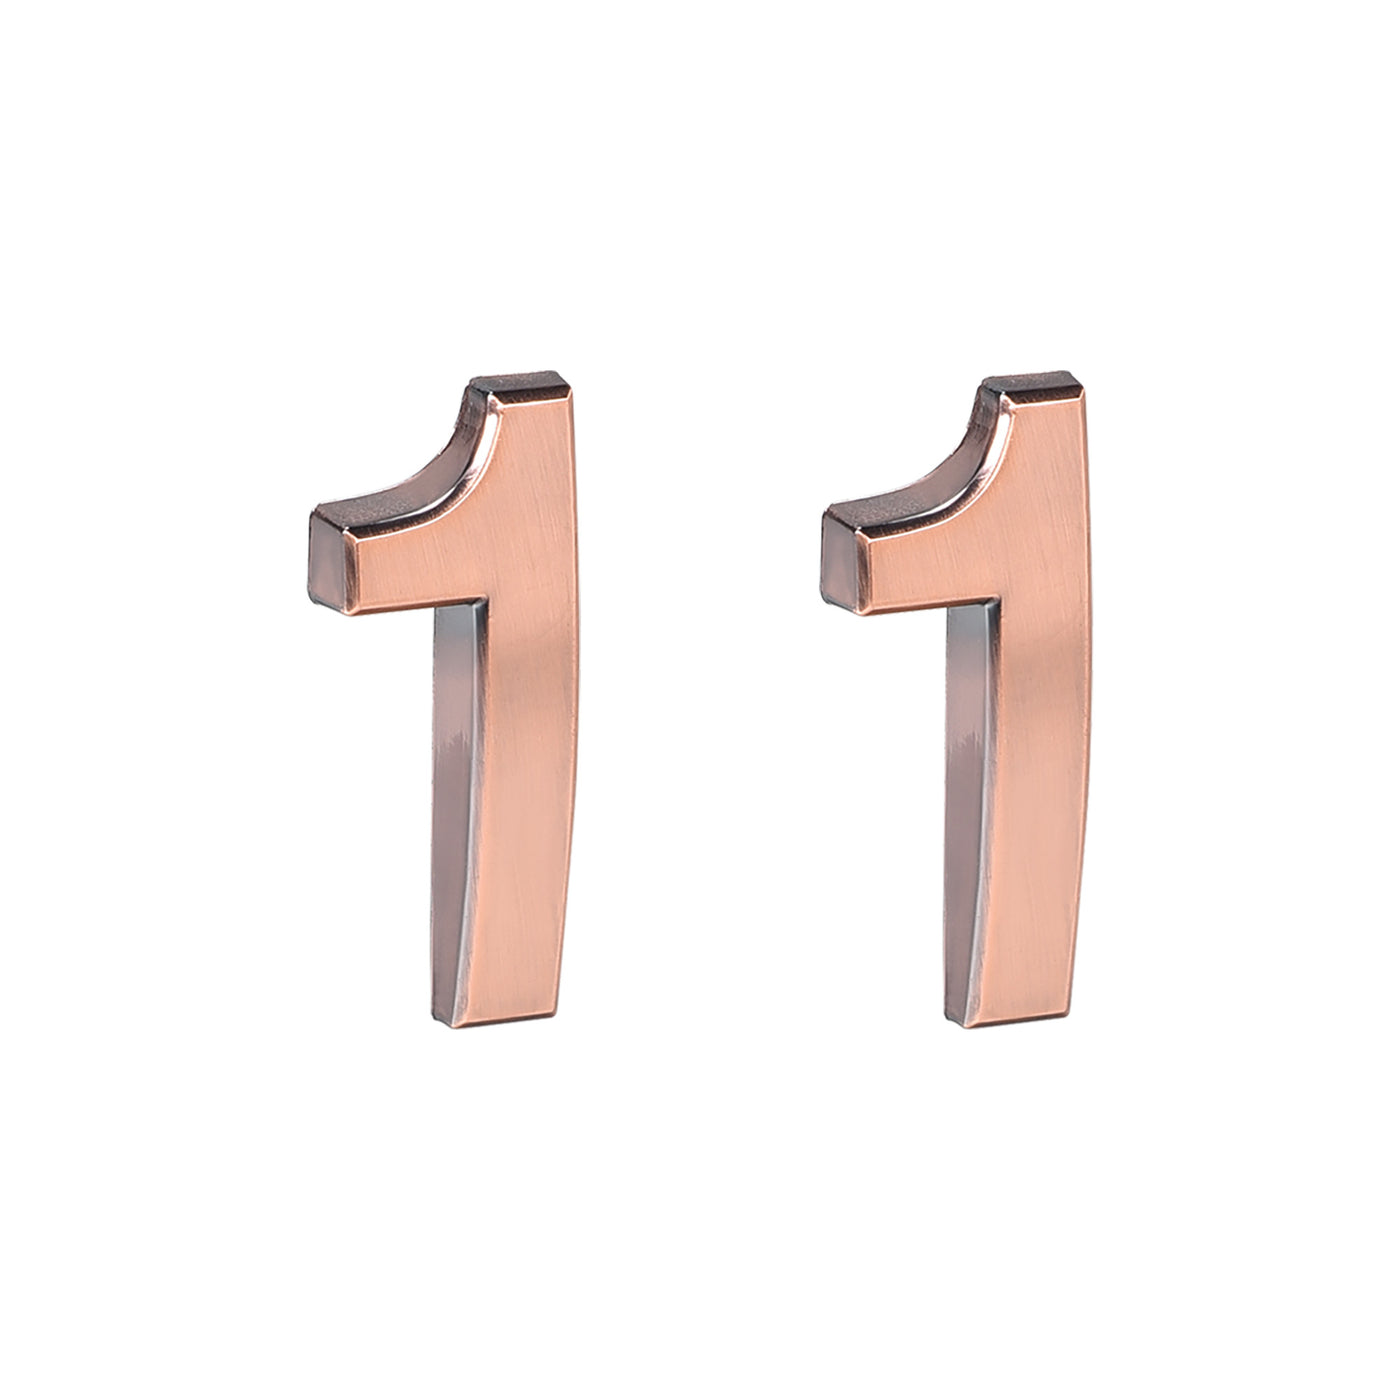 Uxcell Uxcell Self Adhesive House Number, 2.76 Inch ABS Plastic Number 0 for House Hotel Mailbox Address Sign Bronze Brushed 2 Pcs